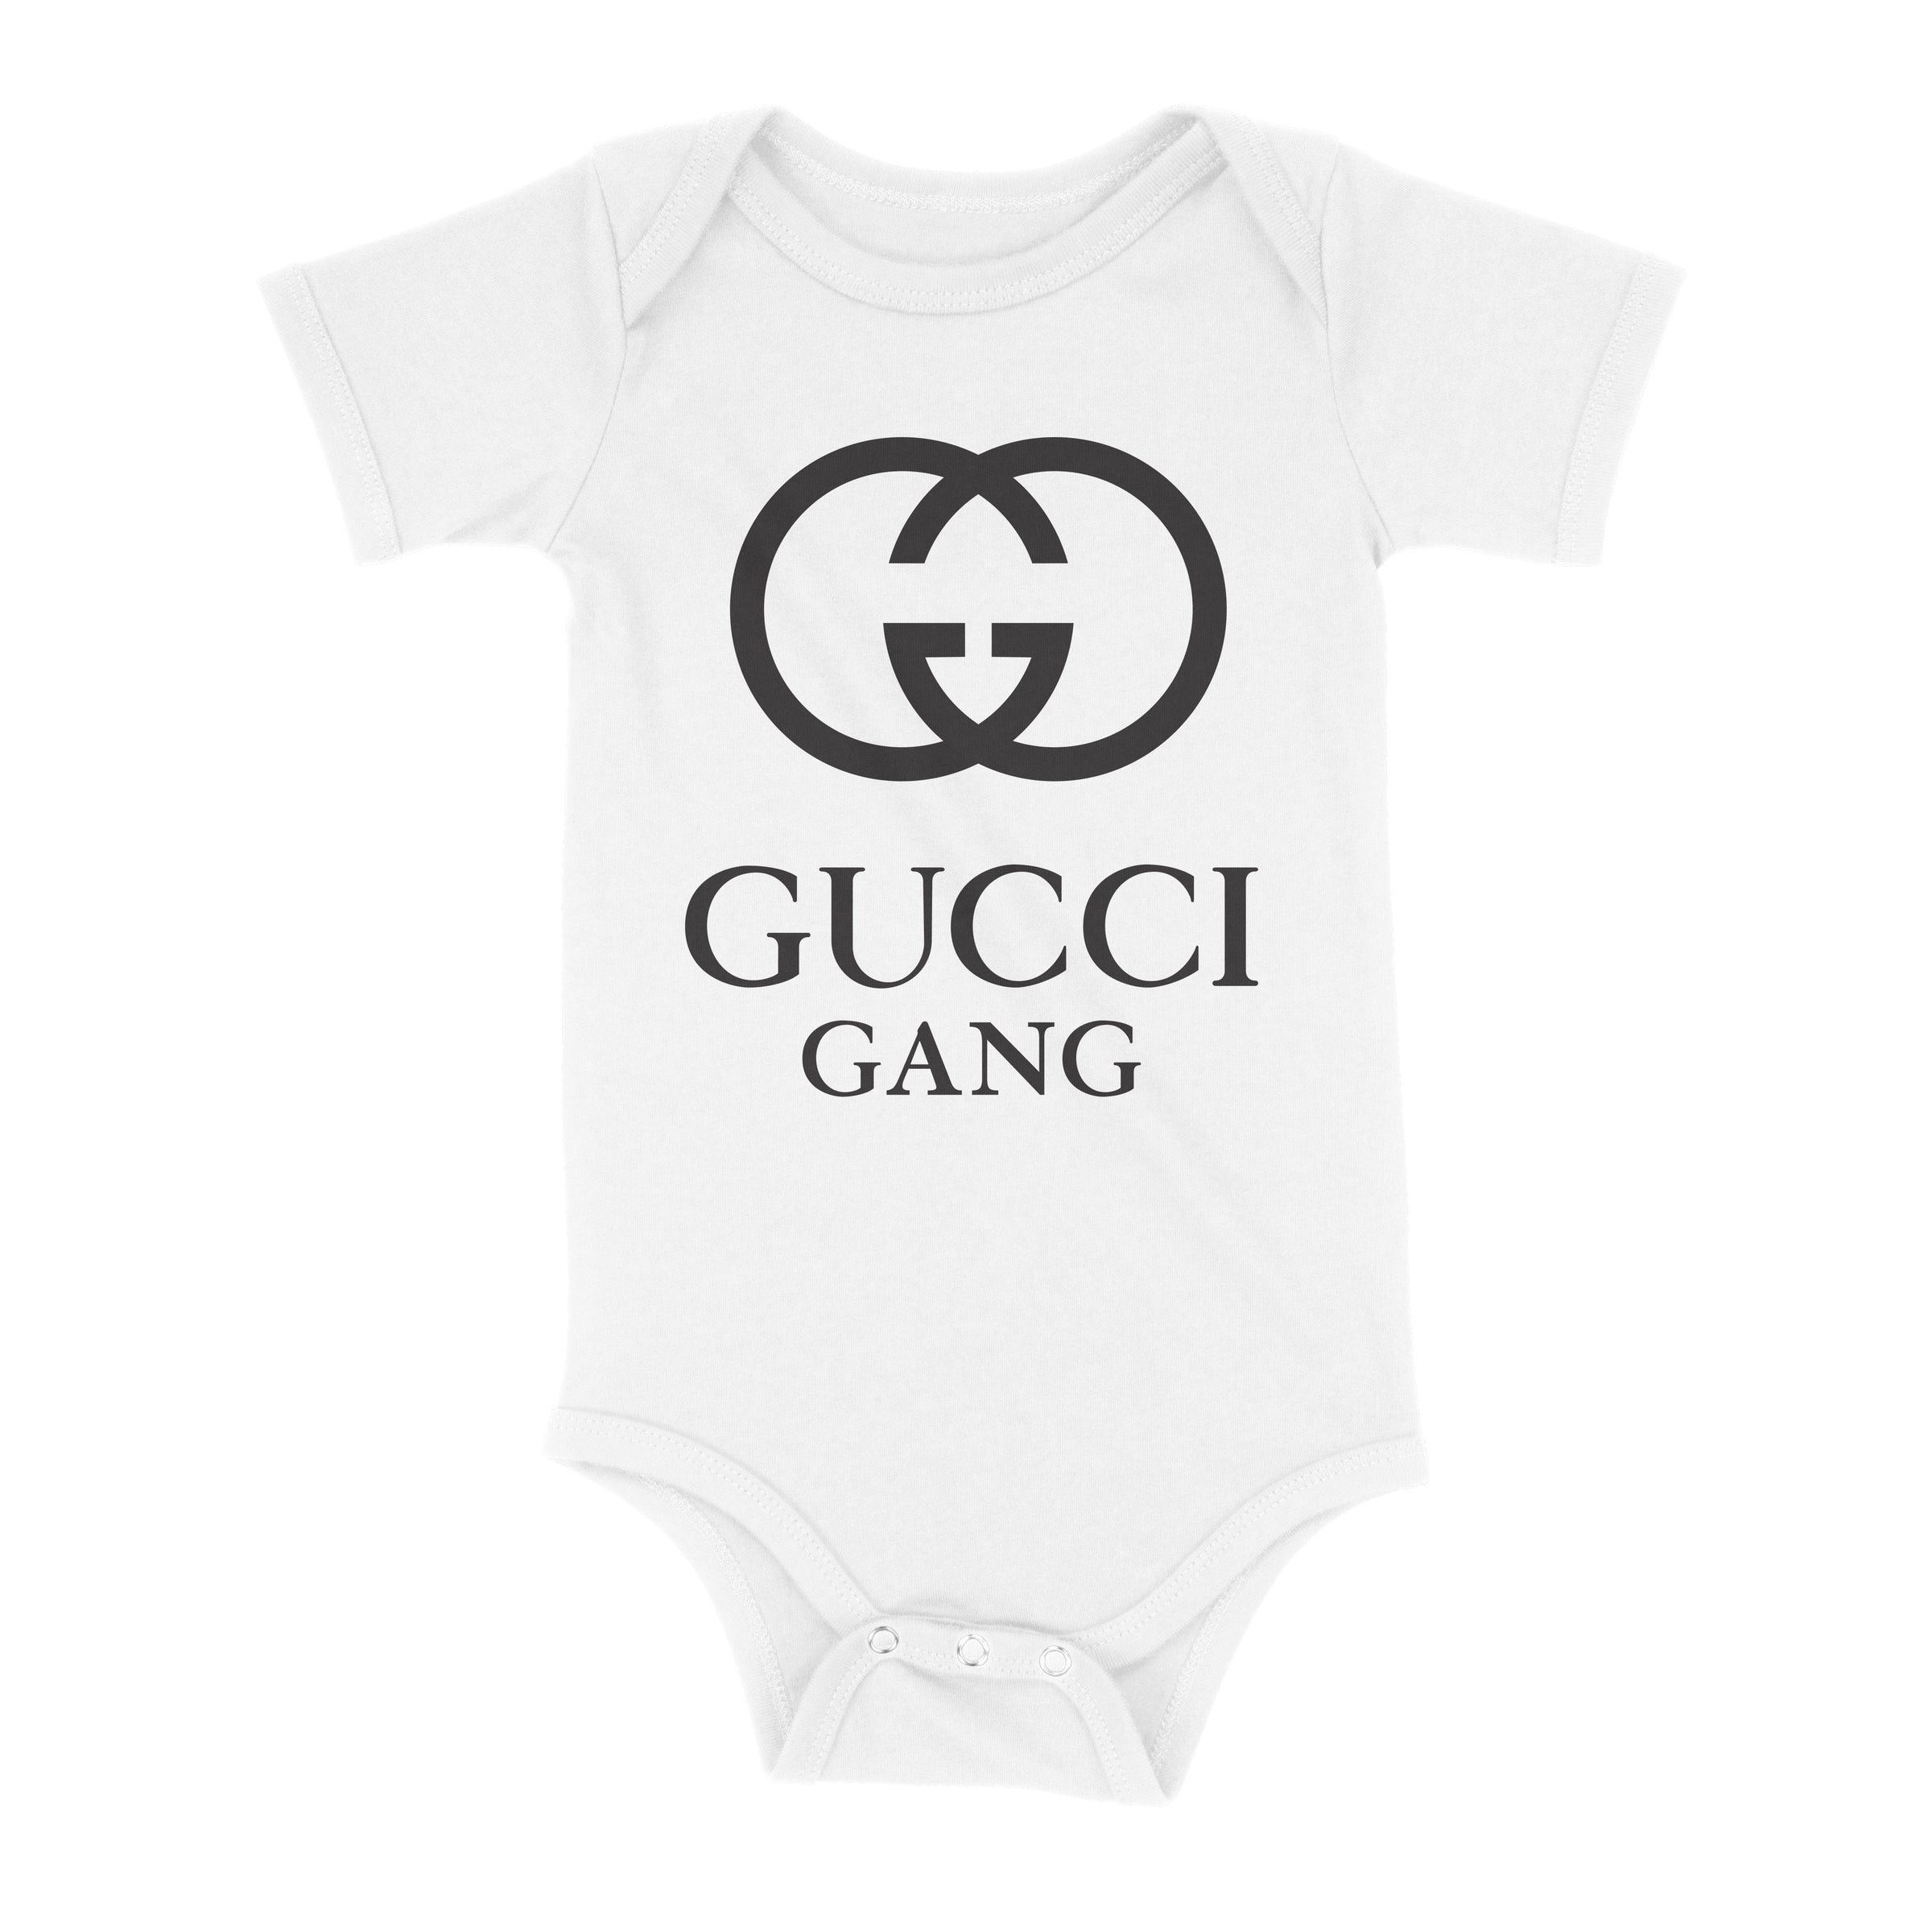 Gucci Gang Baby Onesie - Baby Truth